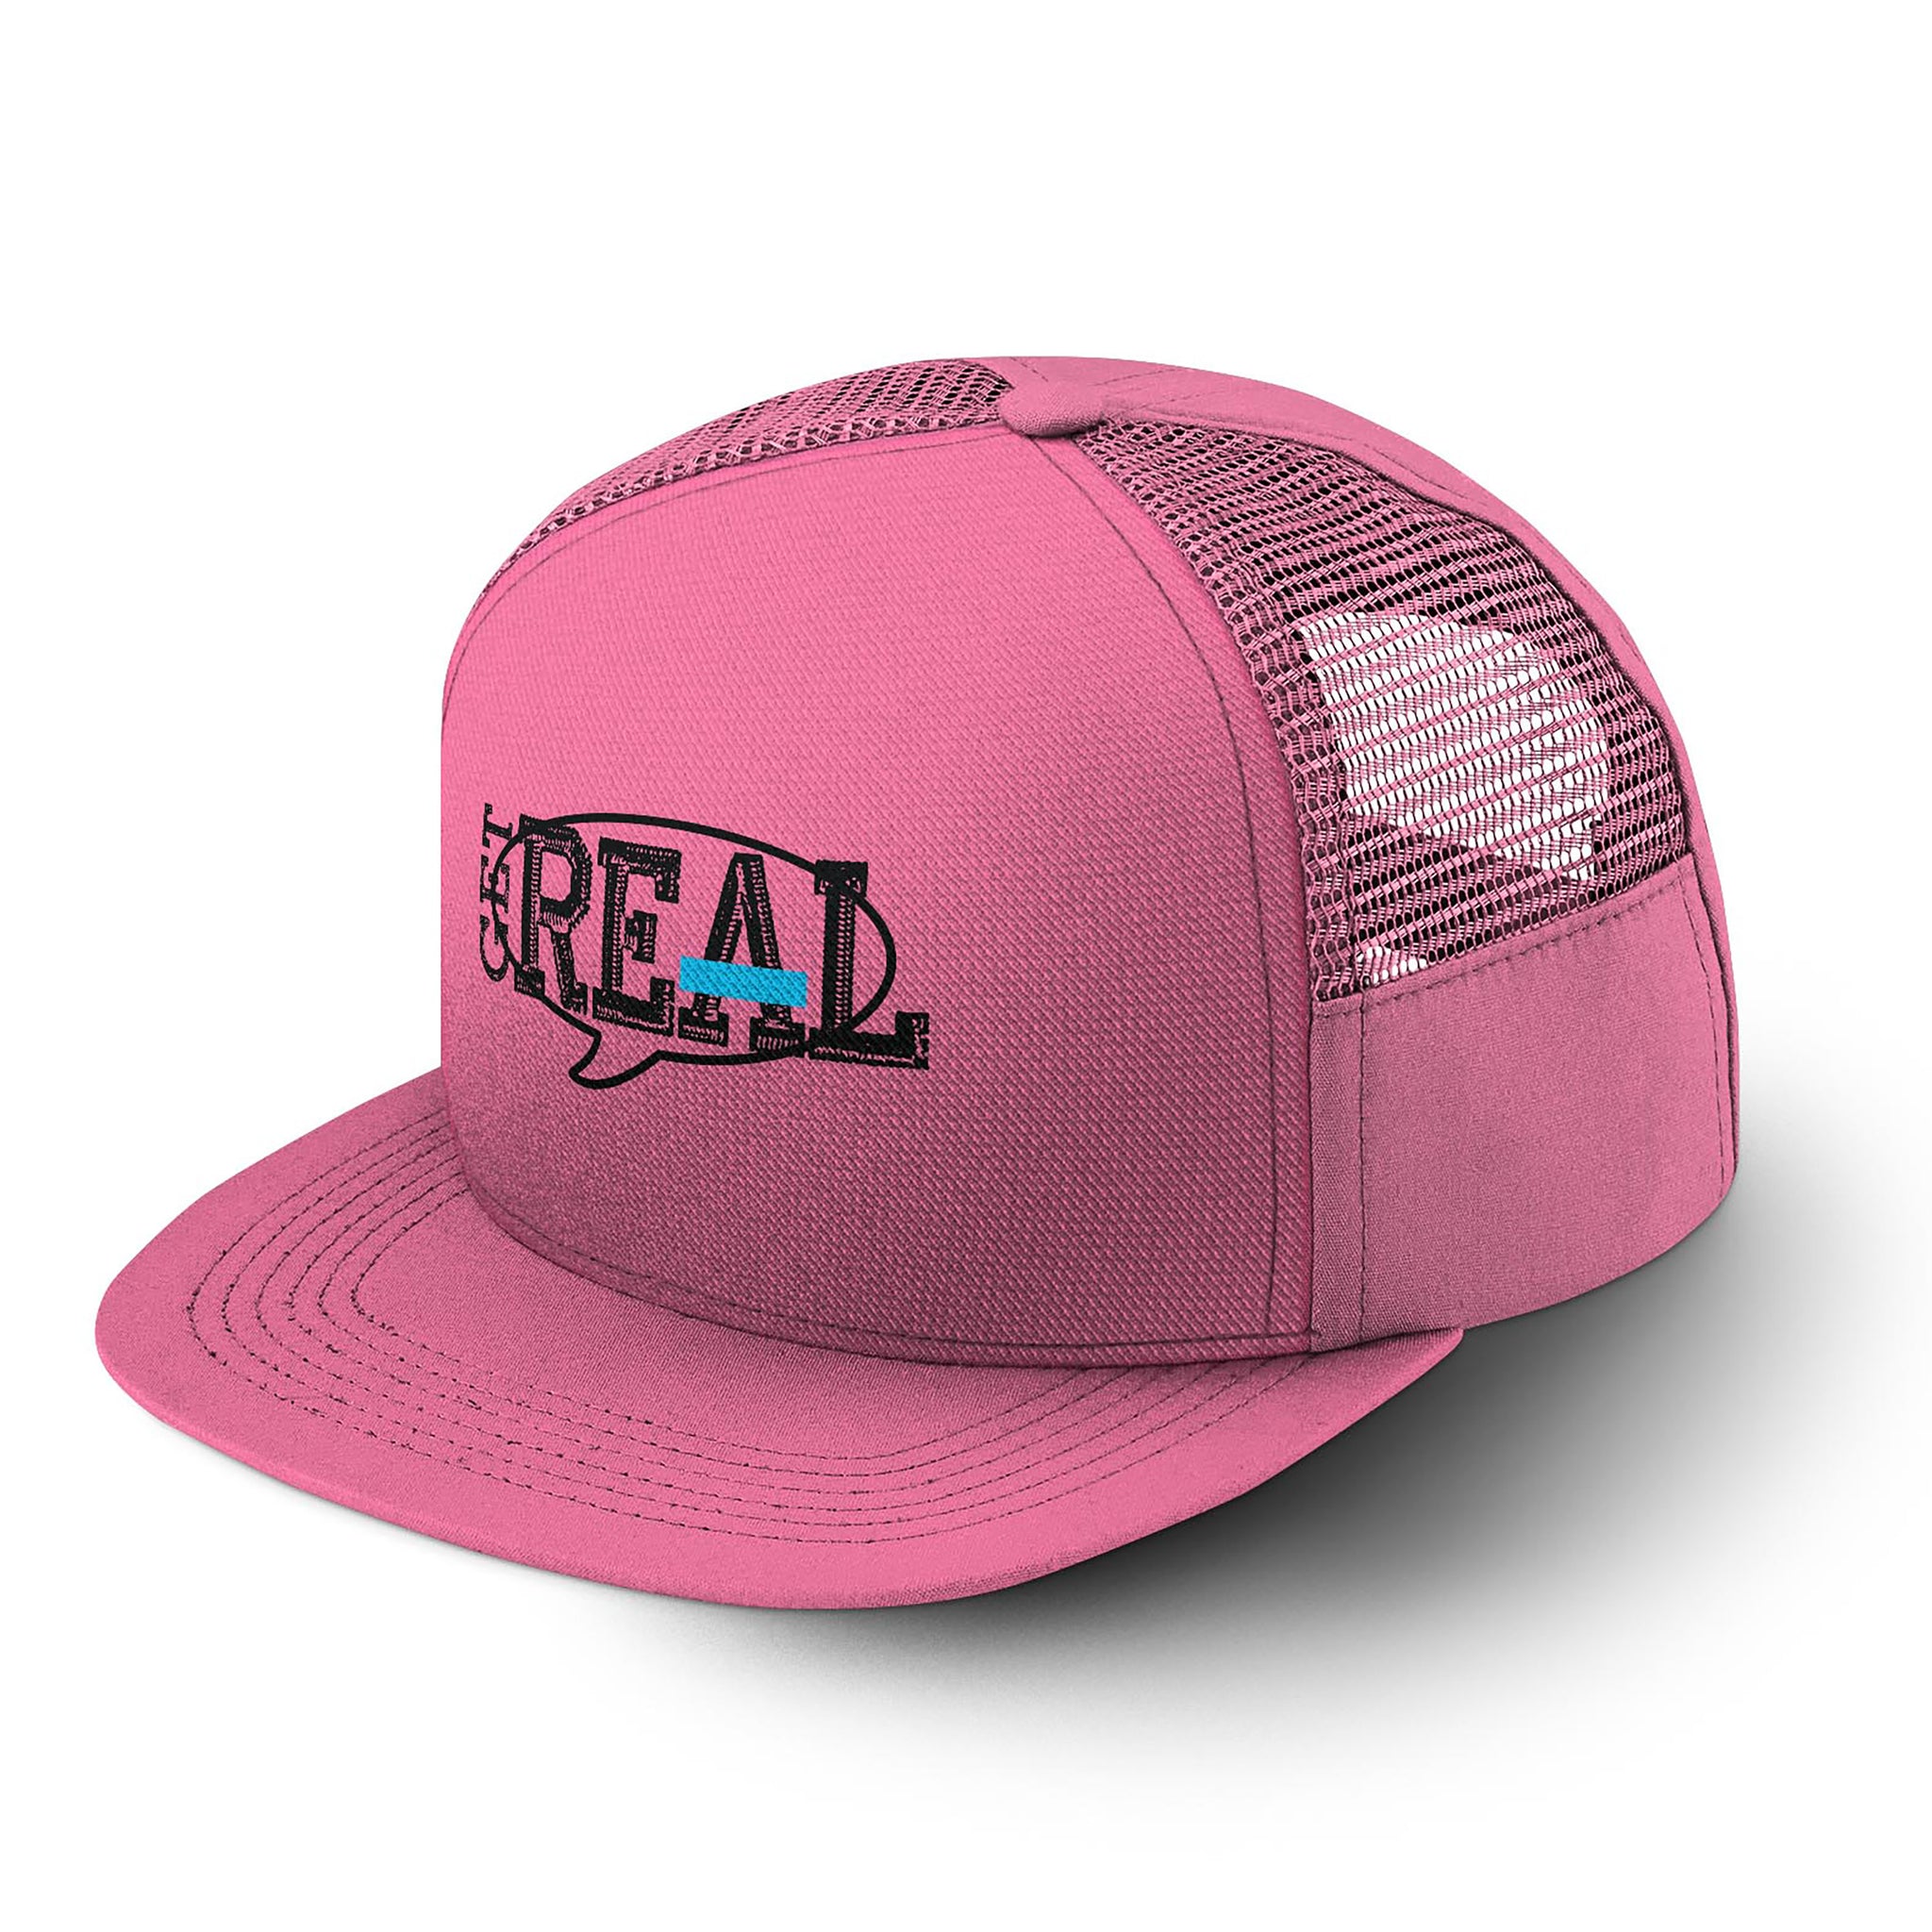 Signature Pink Get REAL Trucker Hat – The Get REAL Movement